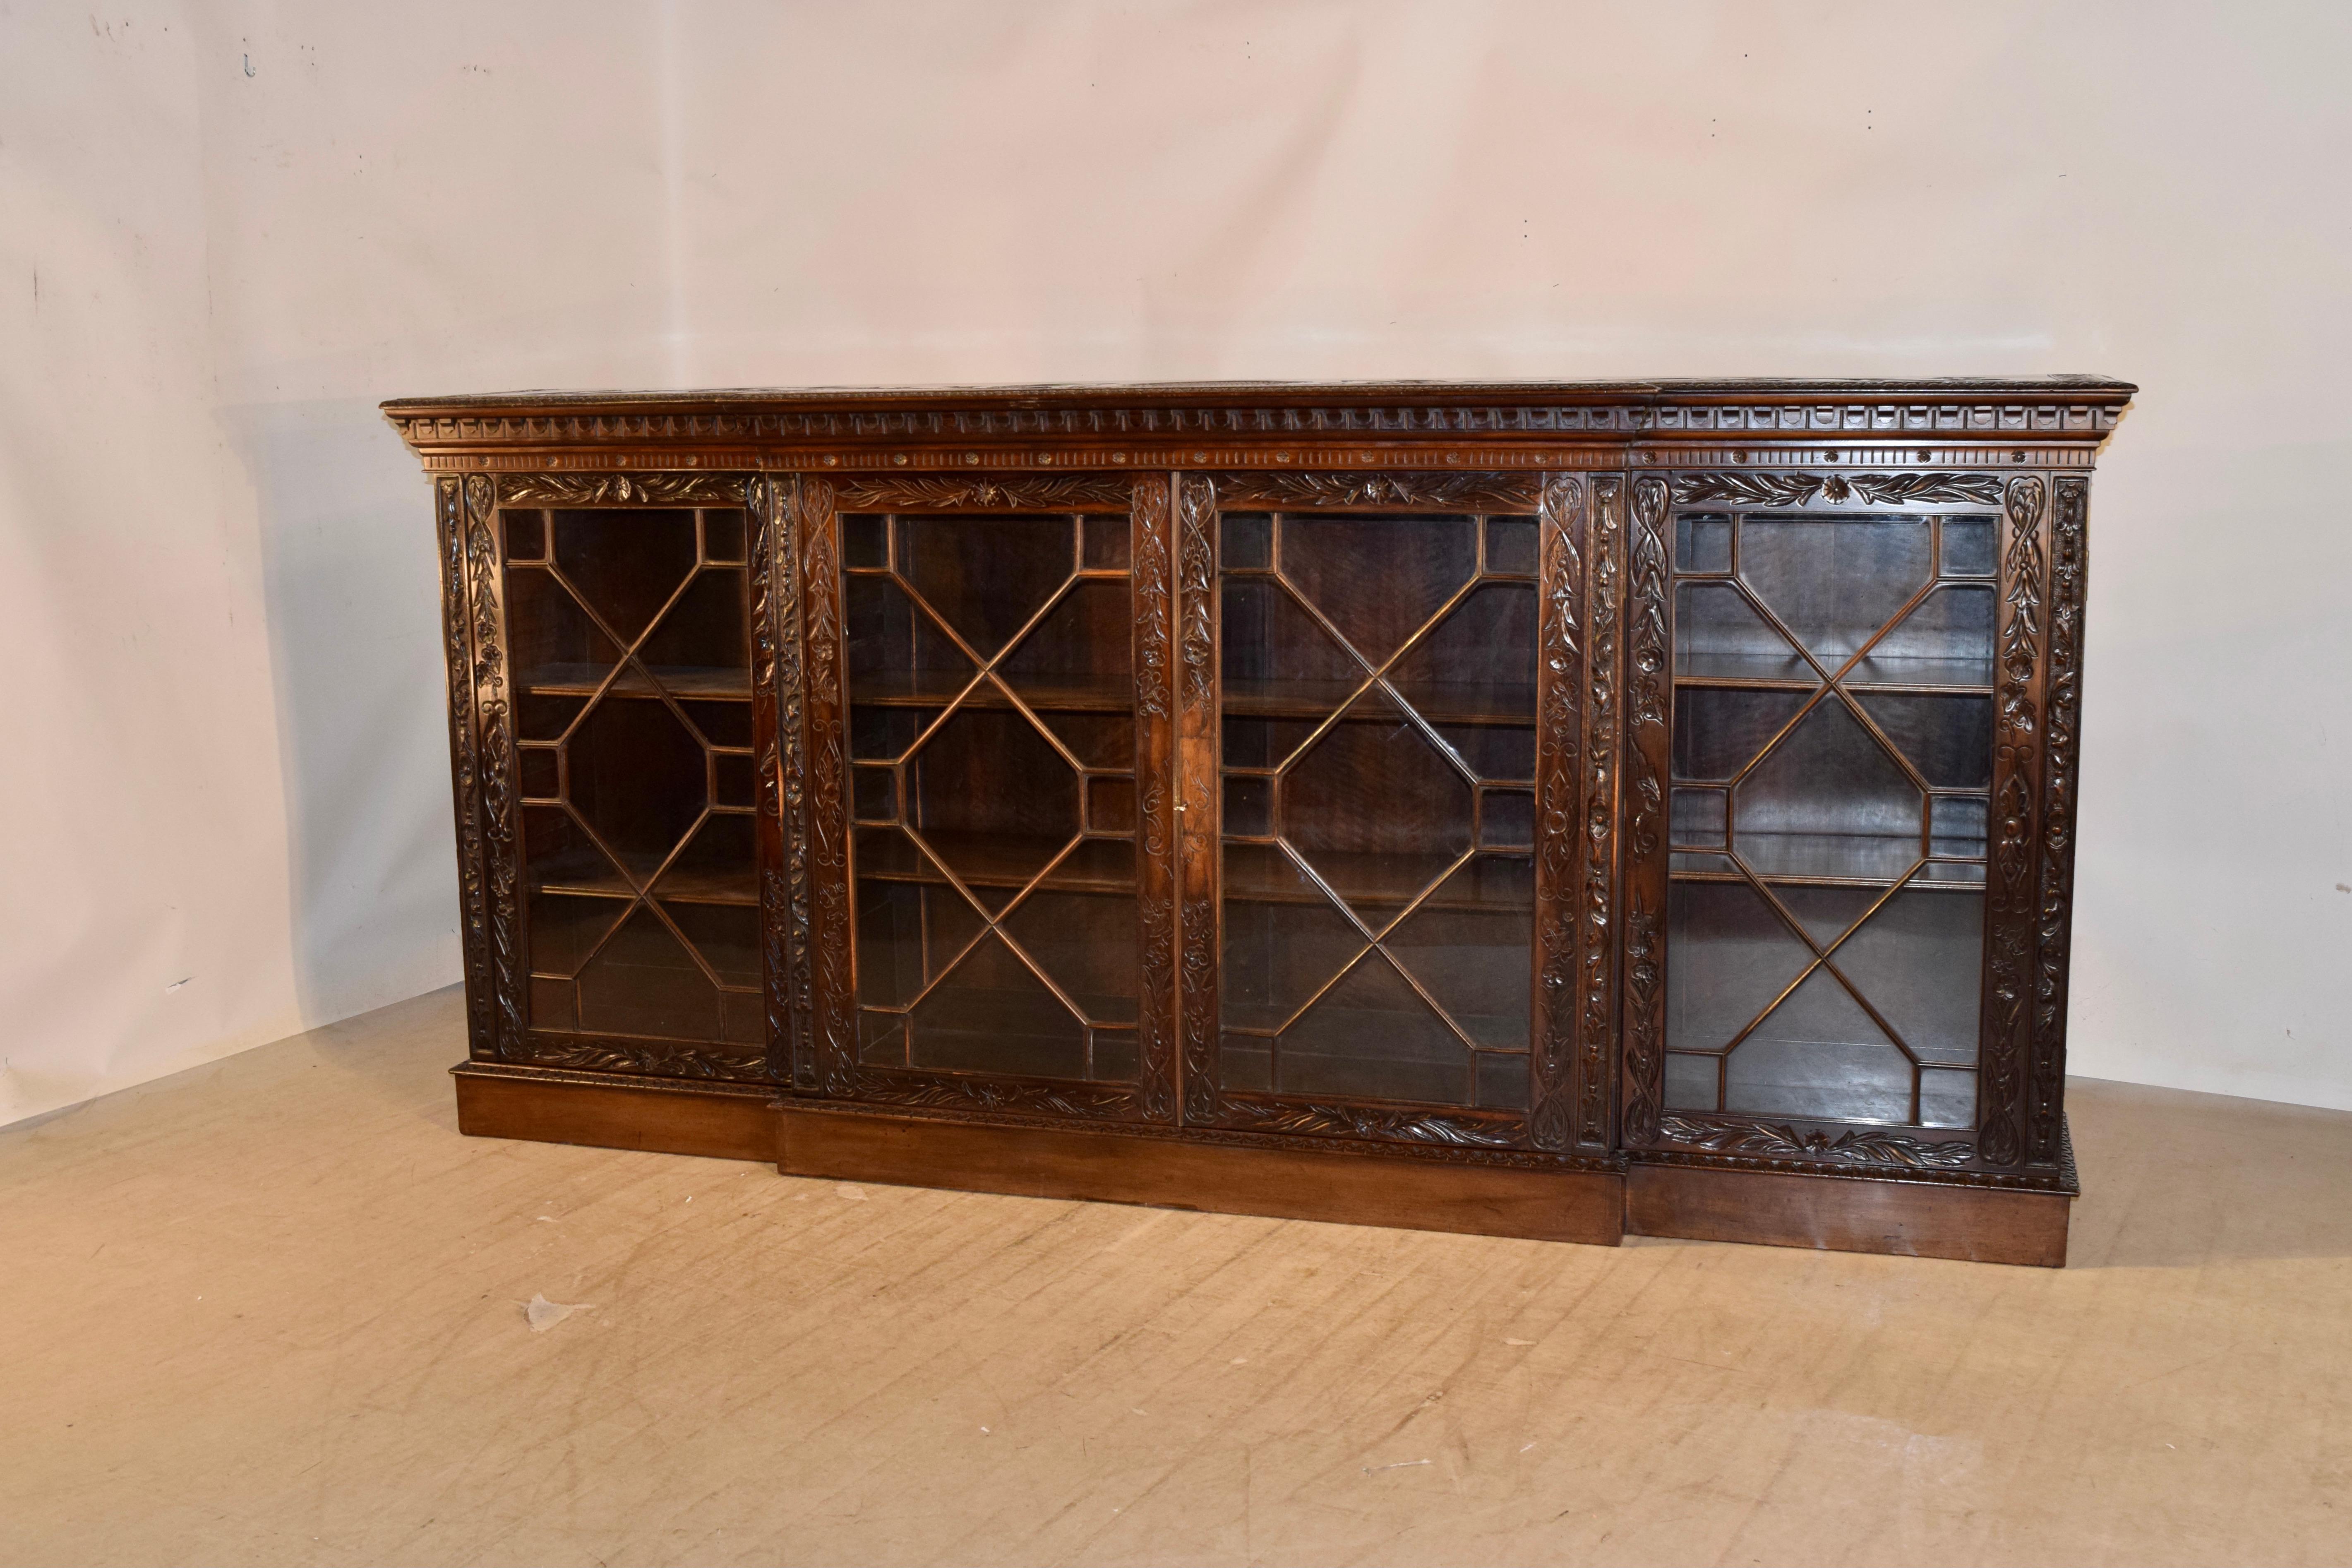 19th century rare and unusual hand carved mahogany bookcase from England. The top has a banded edge which is hand carved decorated and also has a beveled and carved edge around the top. The central design on the top is framed with this banding and